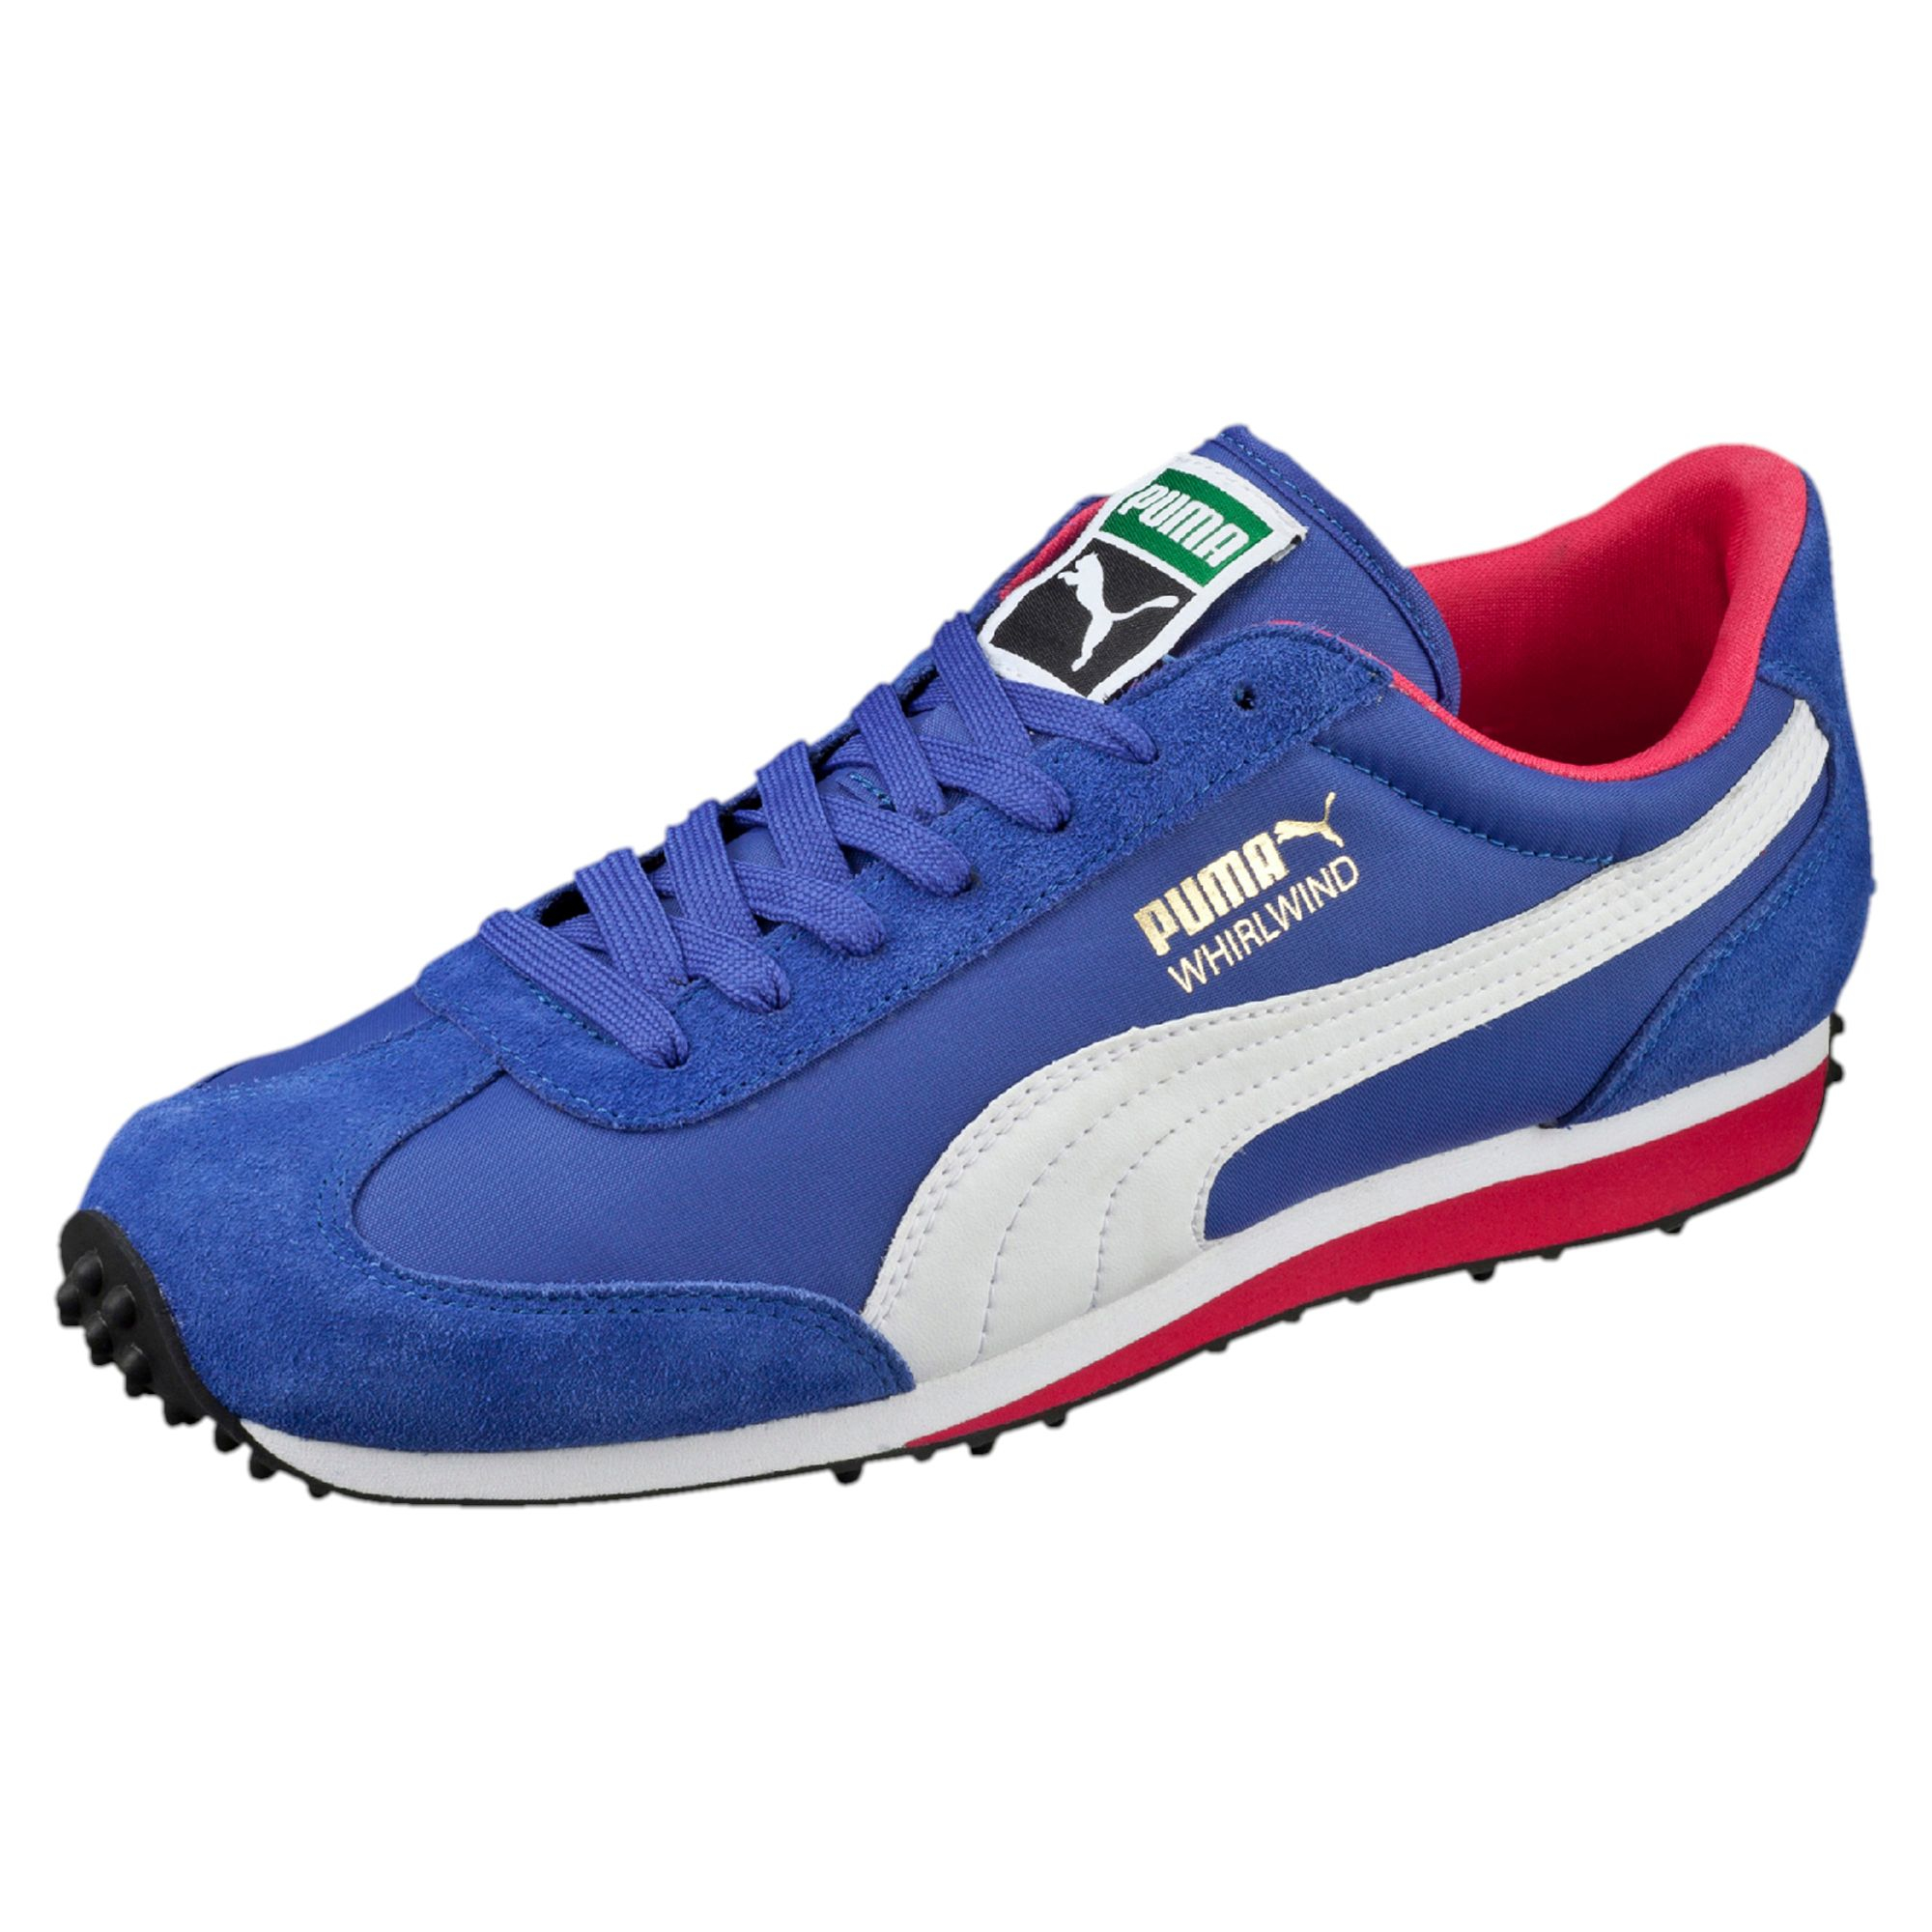 Lyst - PUMA Whirlwind Classic Men's Sneakers in Blue for Men